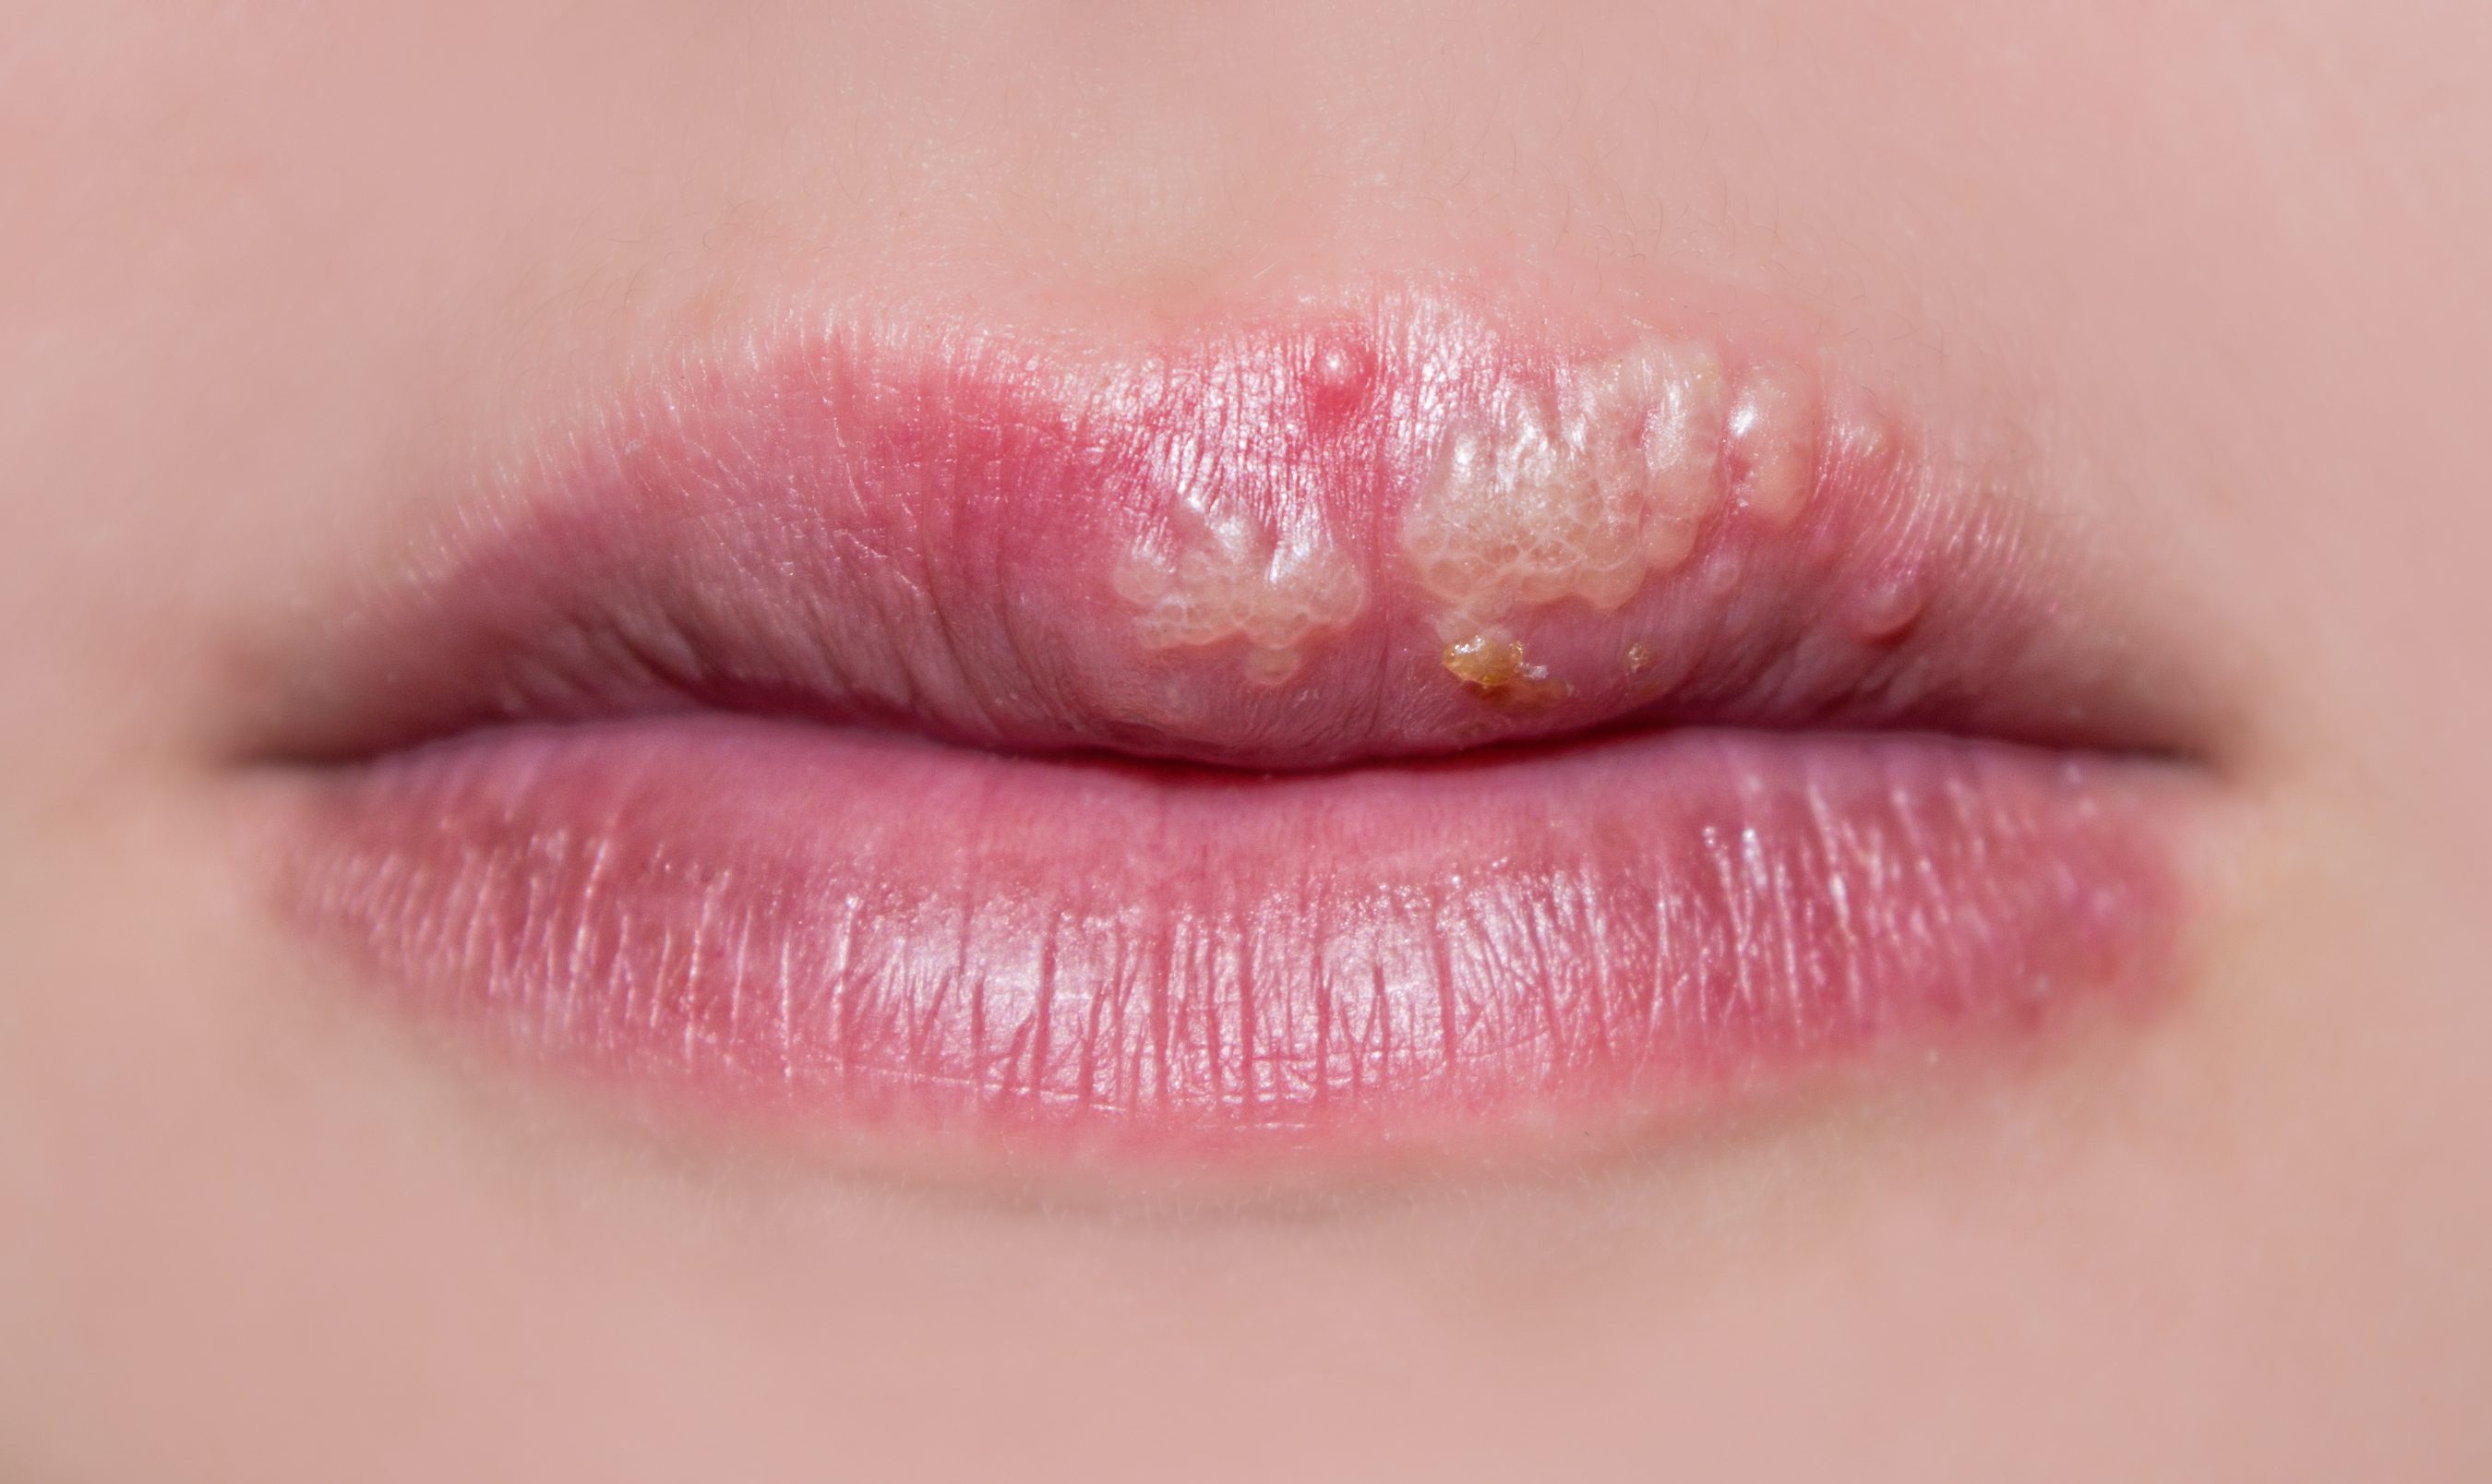 The photo shows manifestations of herpes on the lips of a girl